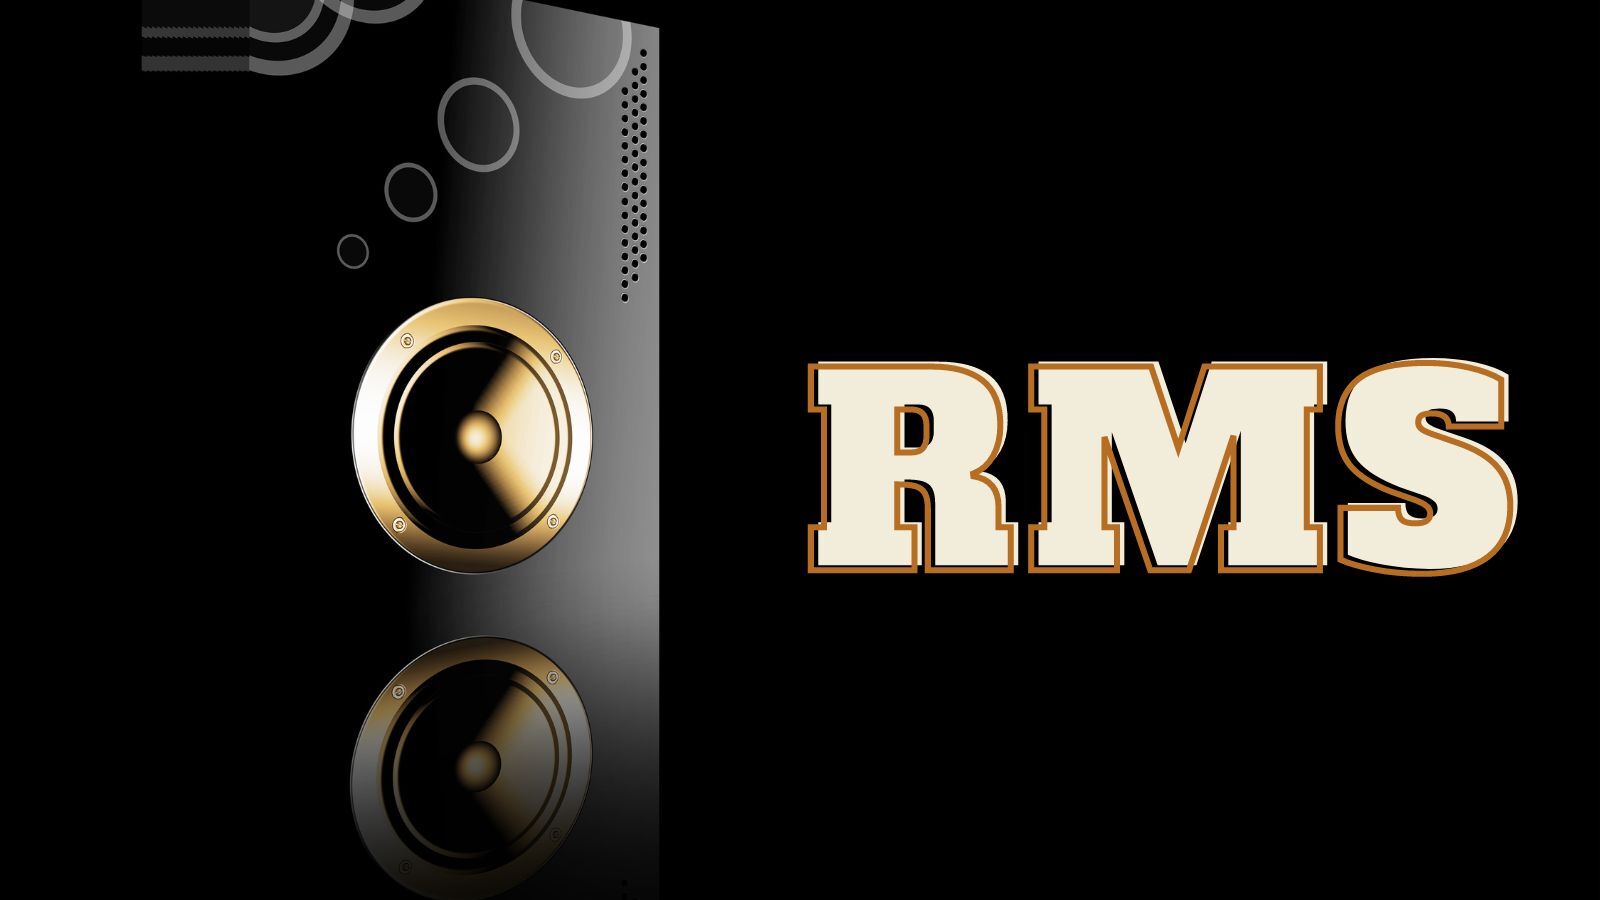 What Does Rms Mean in Speakers? (A Full Guide)